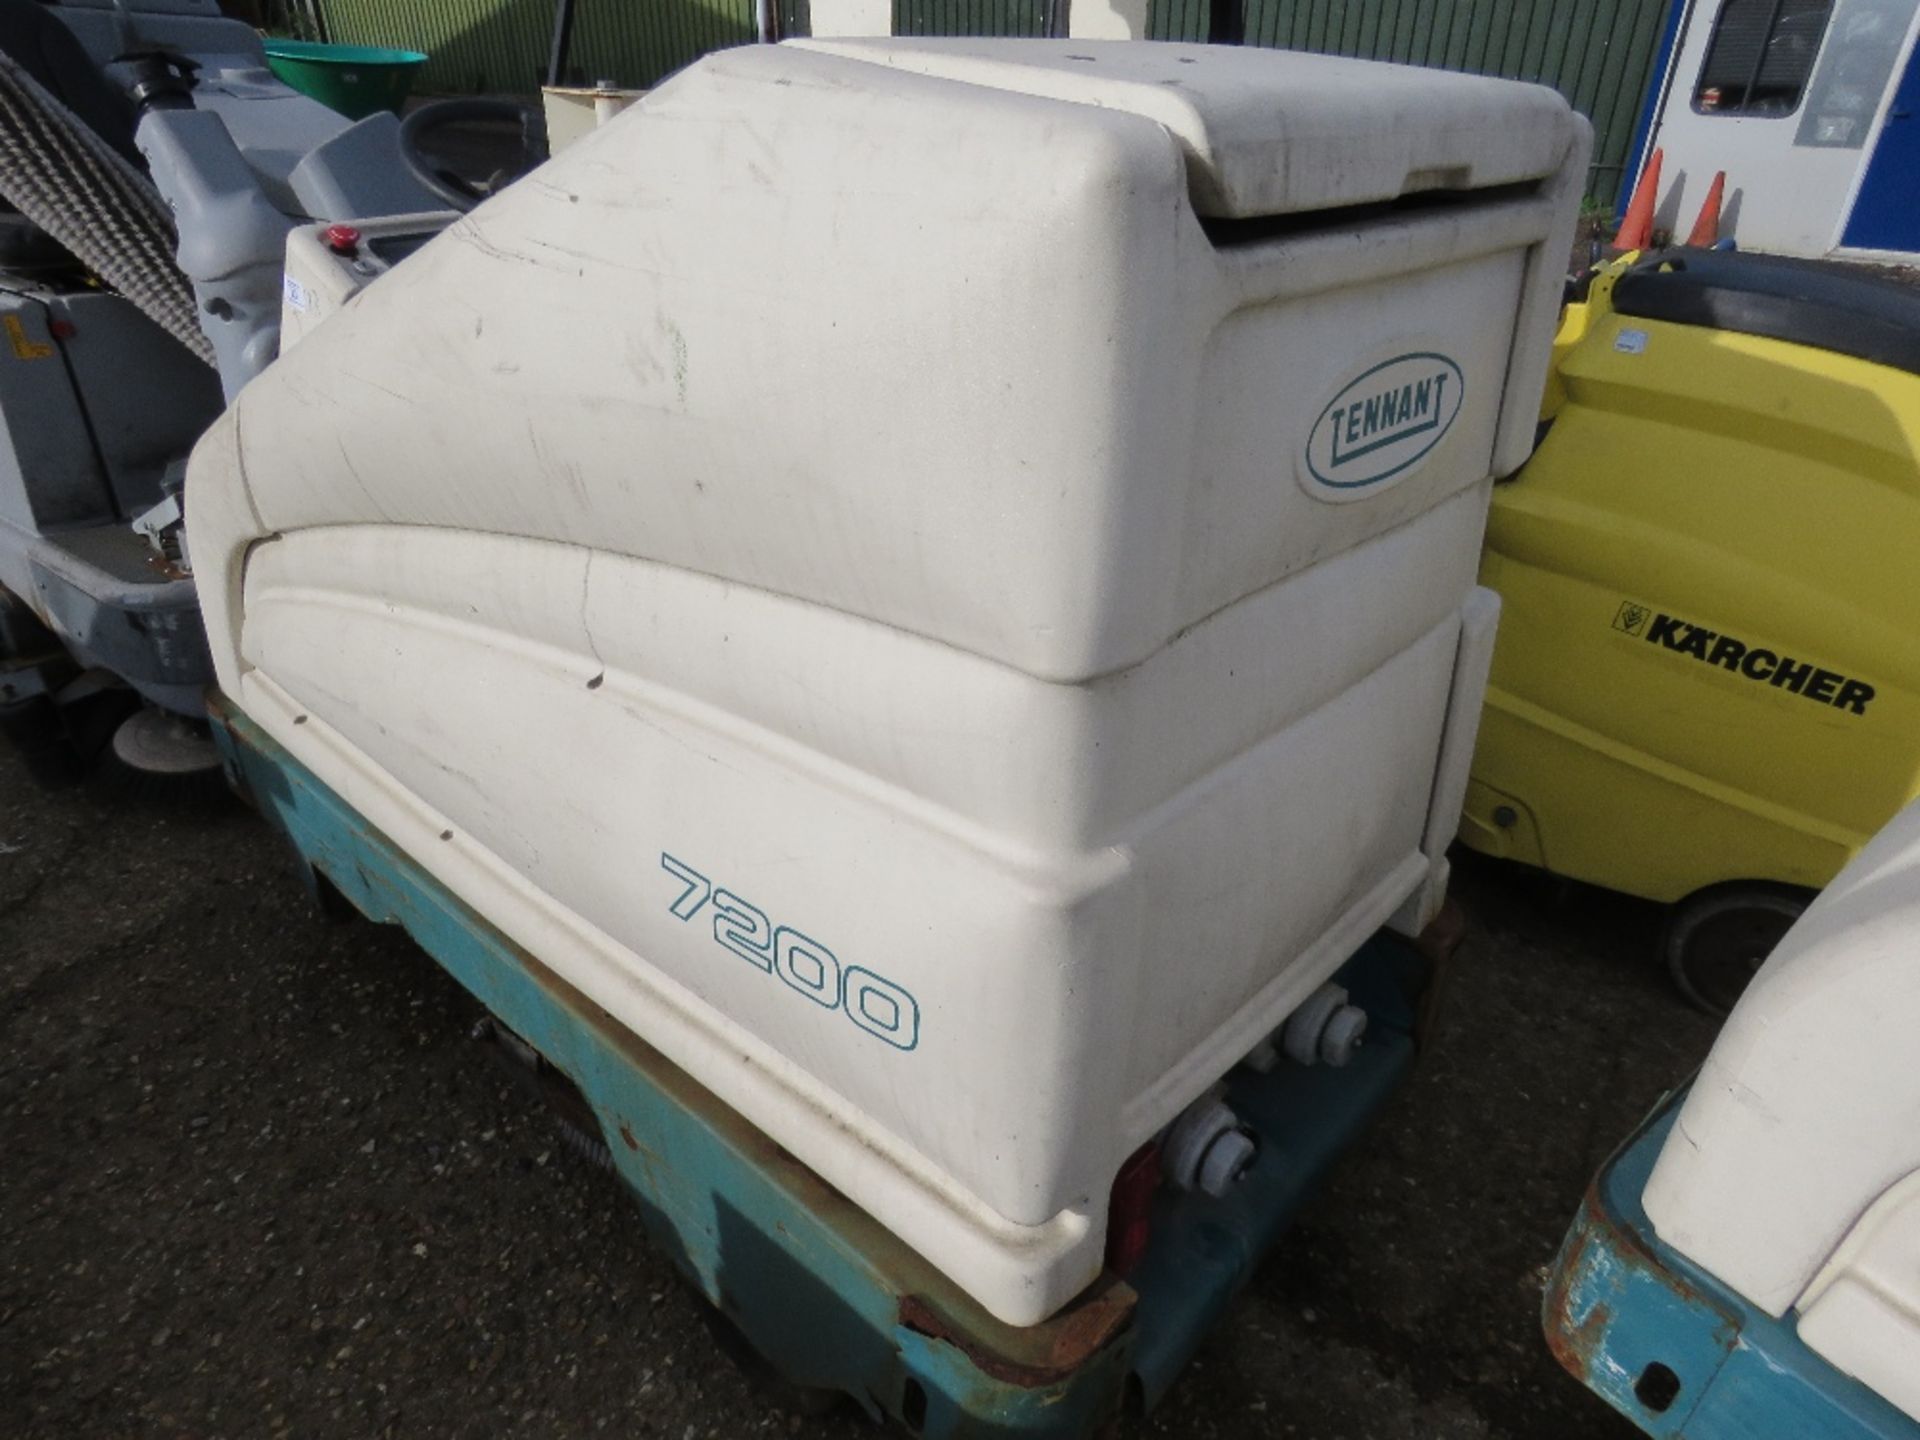 TENNANT 7200 RIDE ON SWEEPER WITH BATTERIES. SOURCED FROM SITE CLEARANCE CONDITION UNKNOWN. - Image 2 of 3